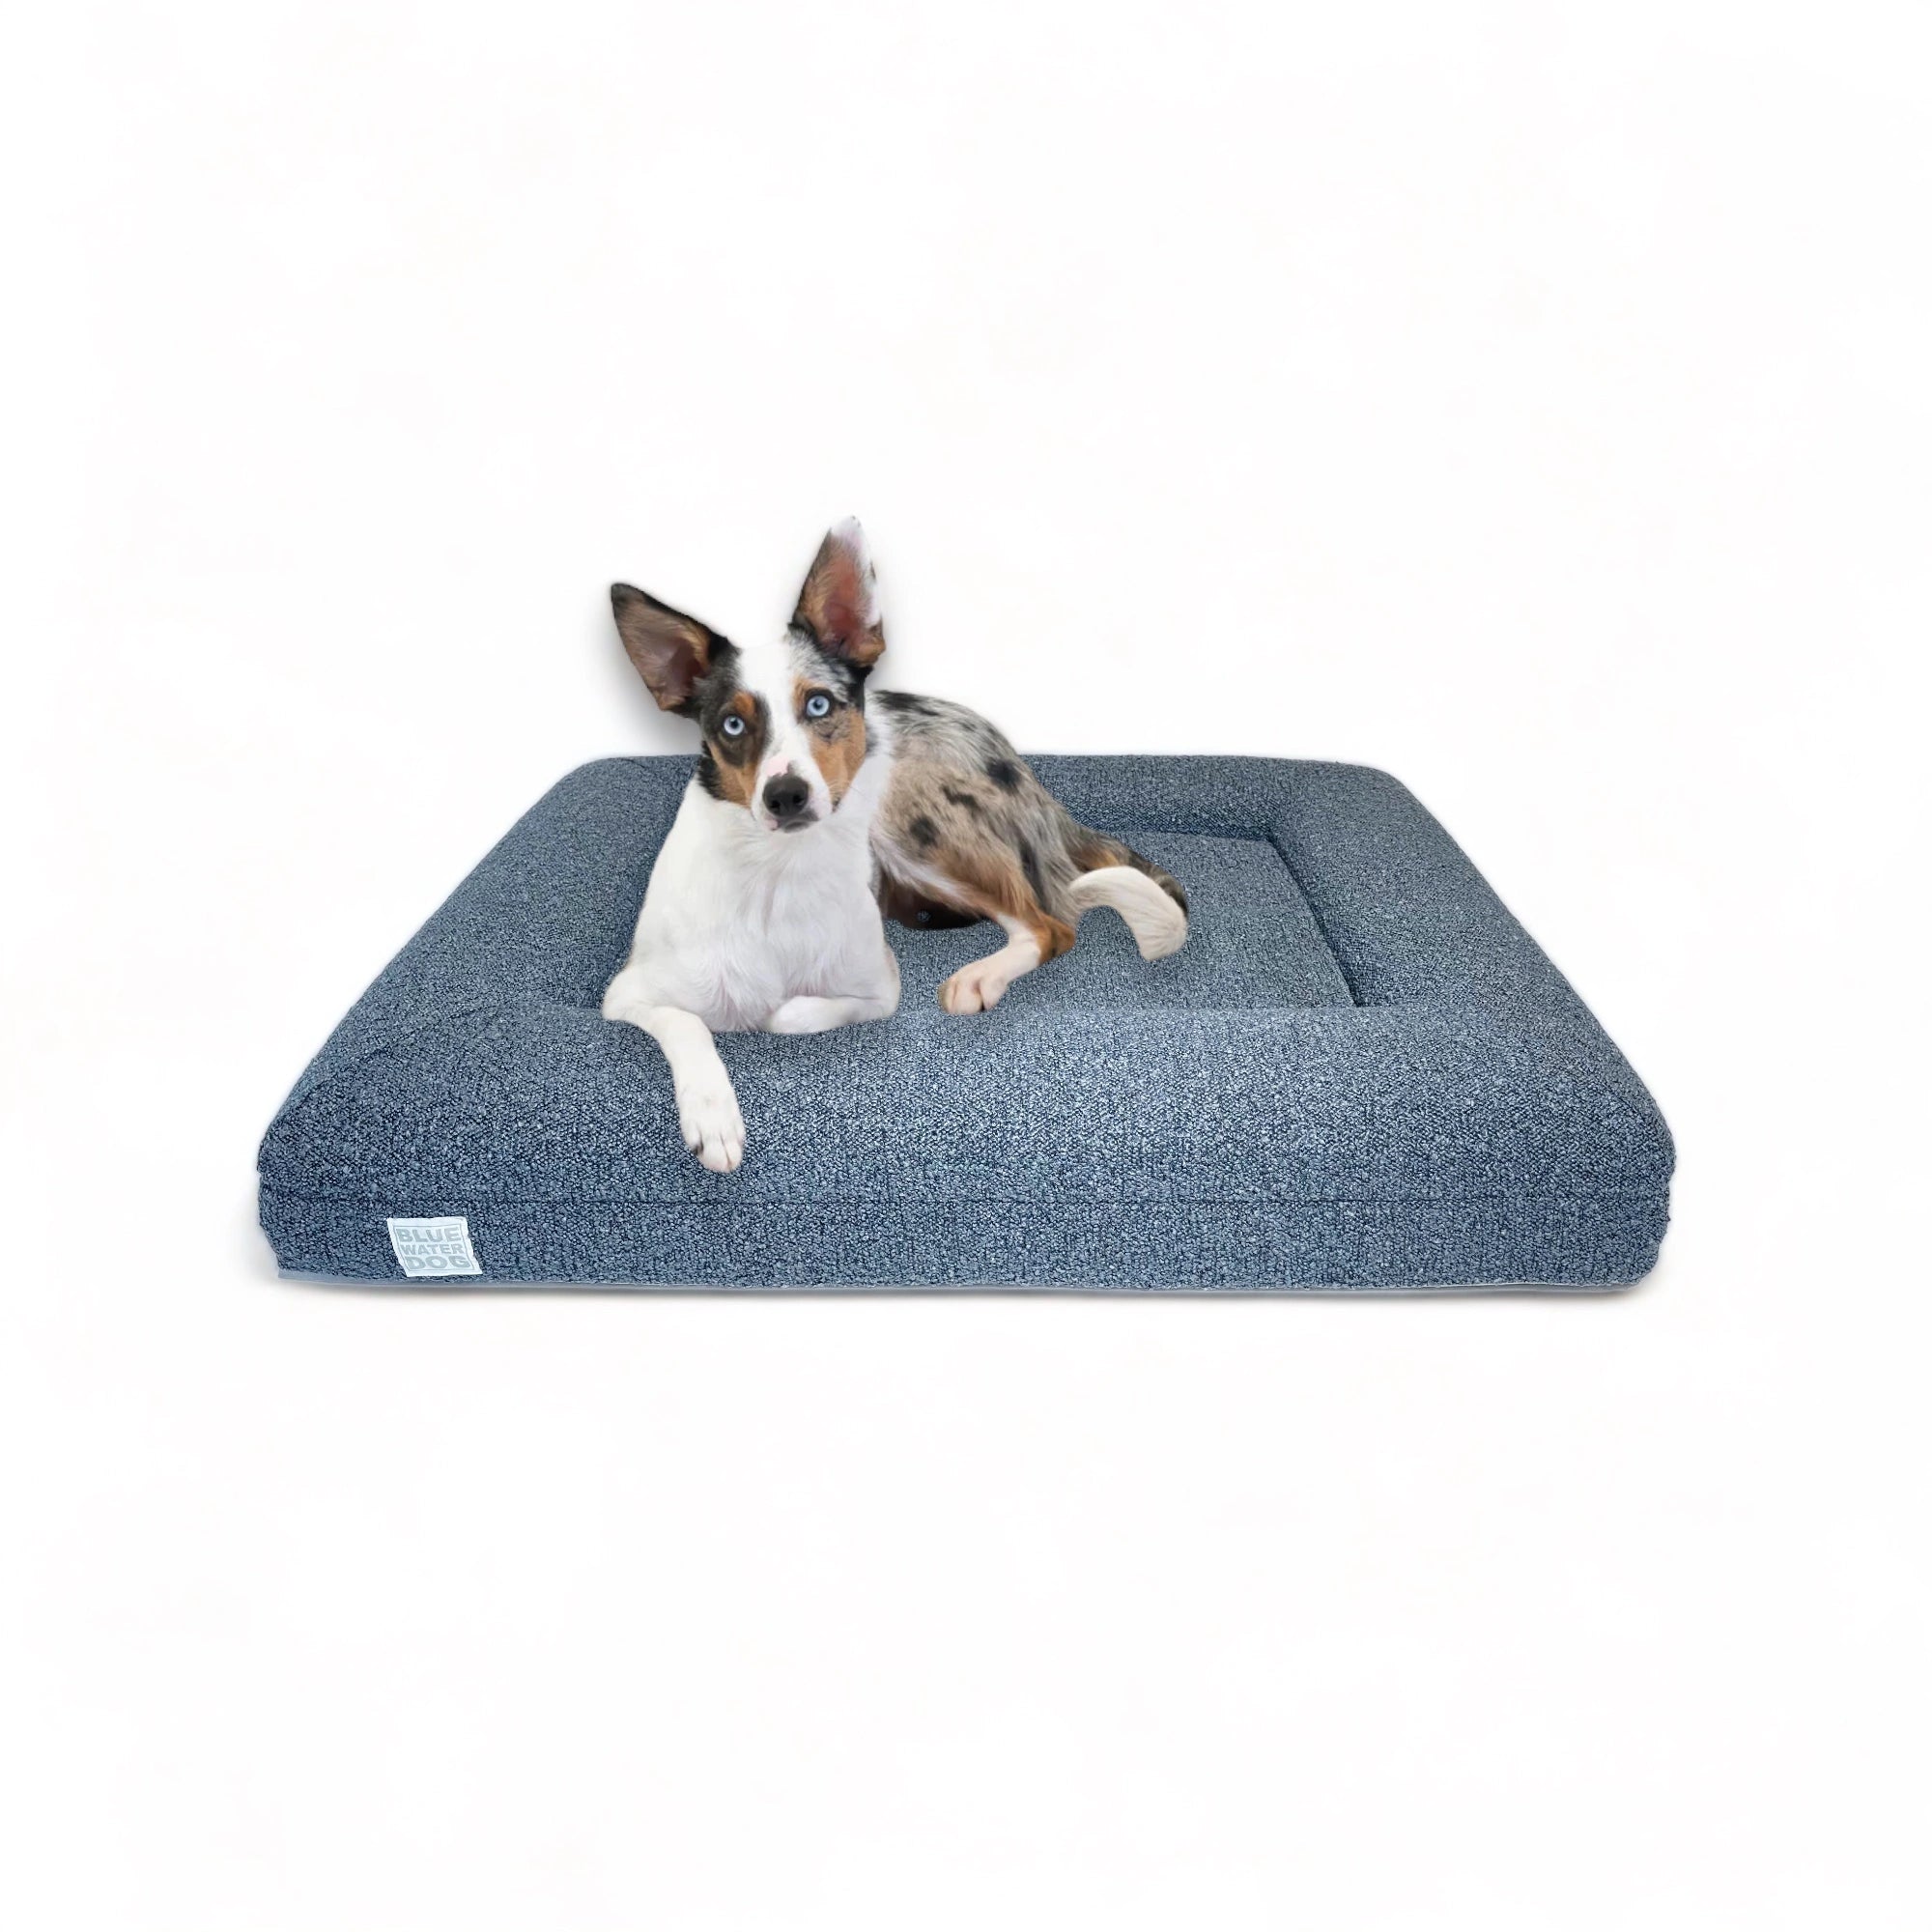 Border Collie laying on a medium, blue-colored orthopedic memory foam boucle dog bed